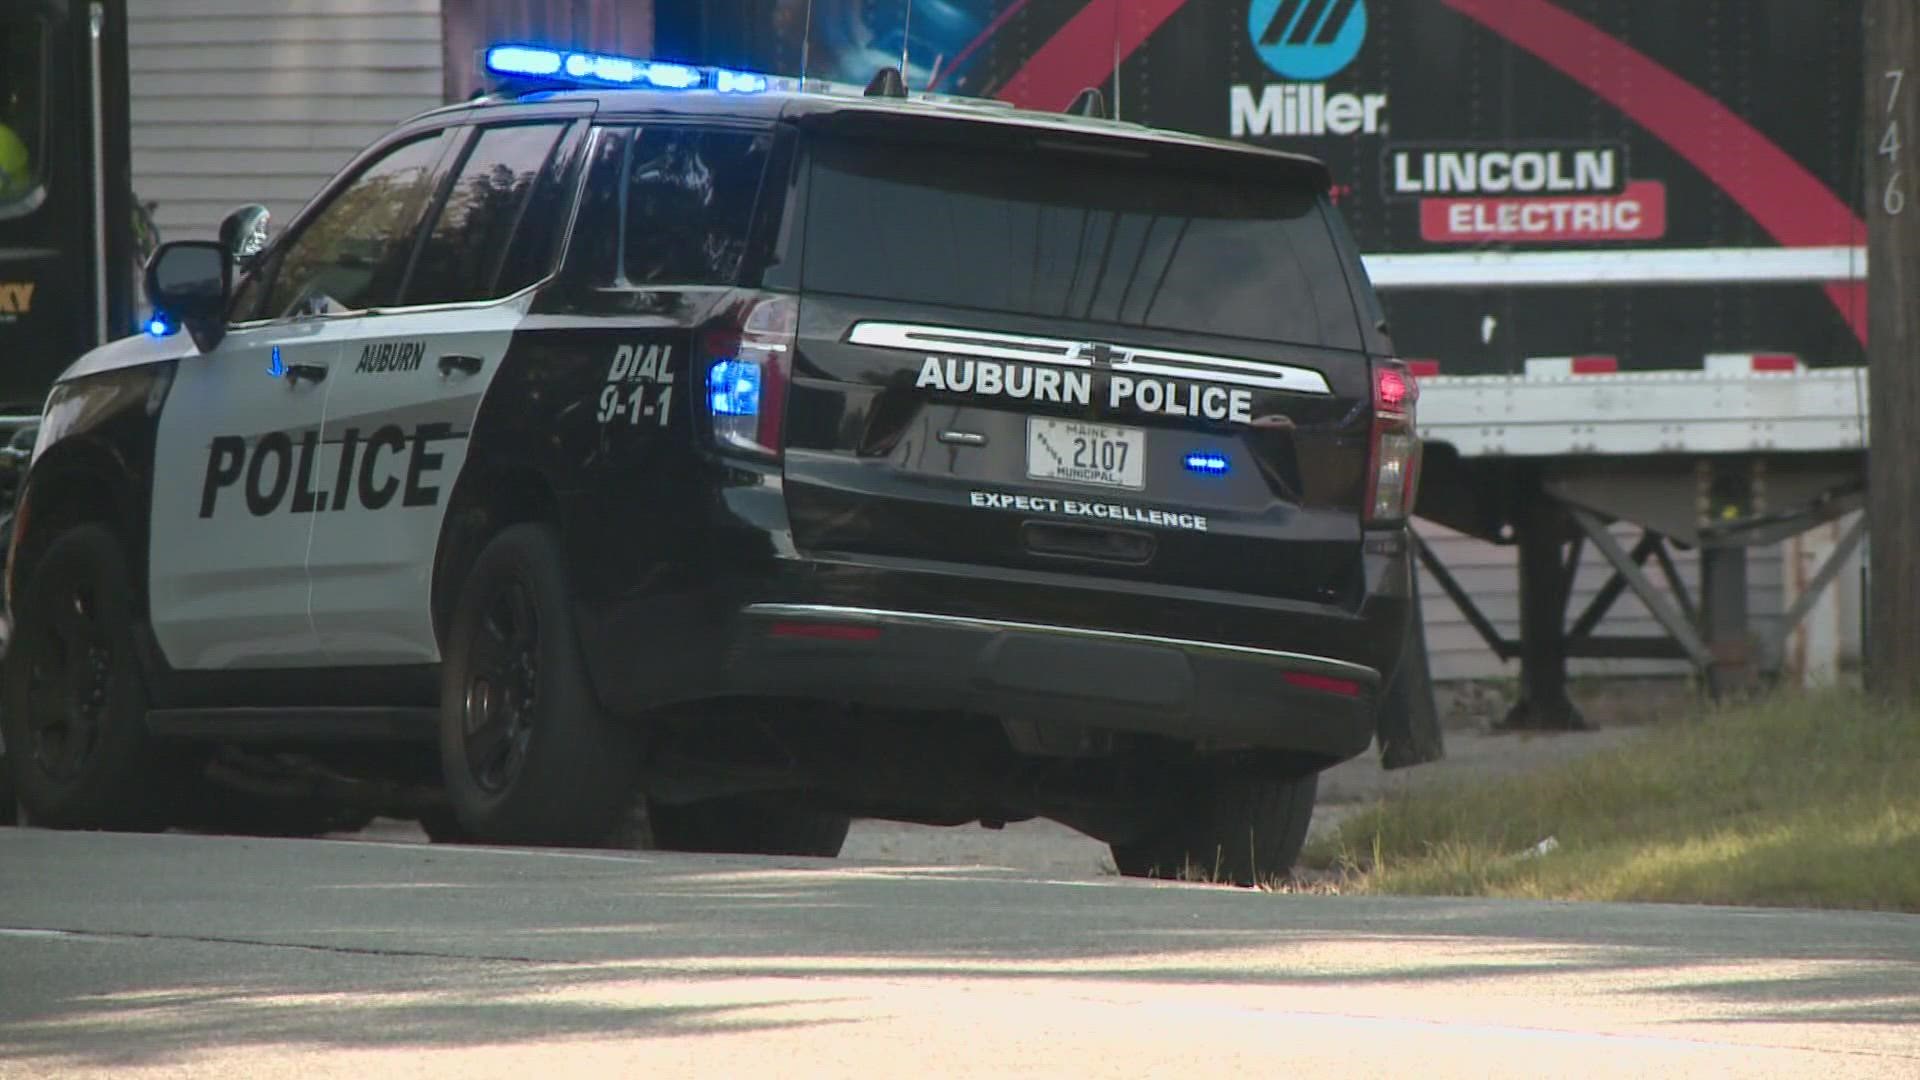 A man shot Monday morning on Washington Street N in Auburn suffered a serious but not life-threatening injury, police said.